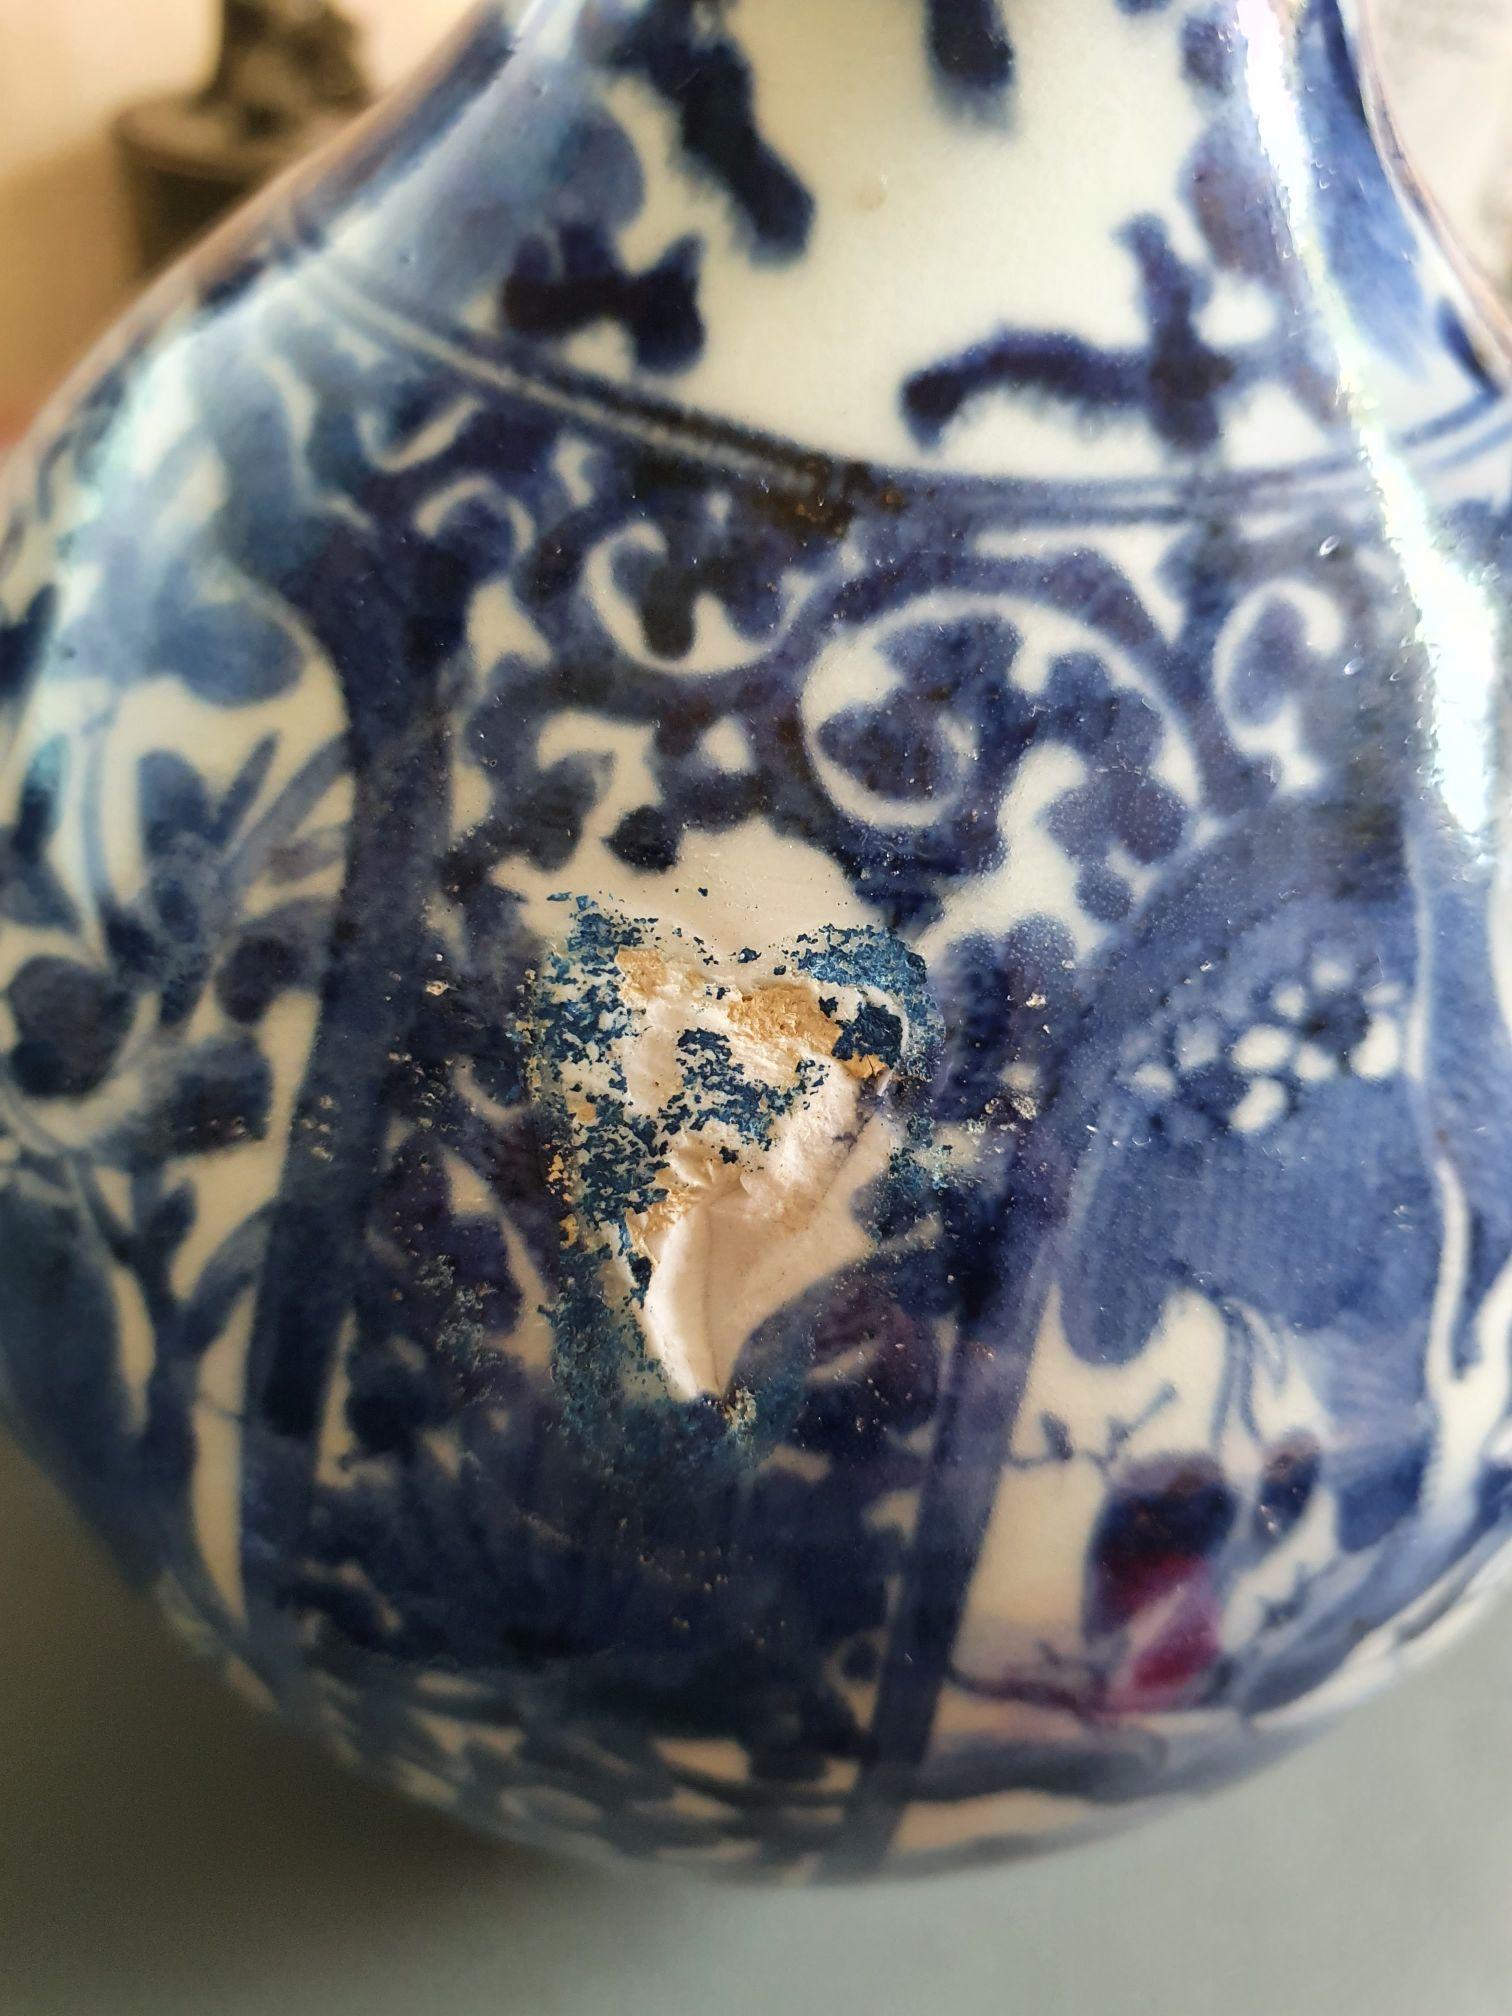 Description
Sharing with you a very nice example of the Edo period. Made in Arita late 17th c. With sublime cobalt blue colours and painting. With figural garden landscape scene.

Condition
hairlines/chips/restoration to mouth. 2 chips (partly